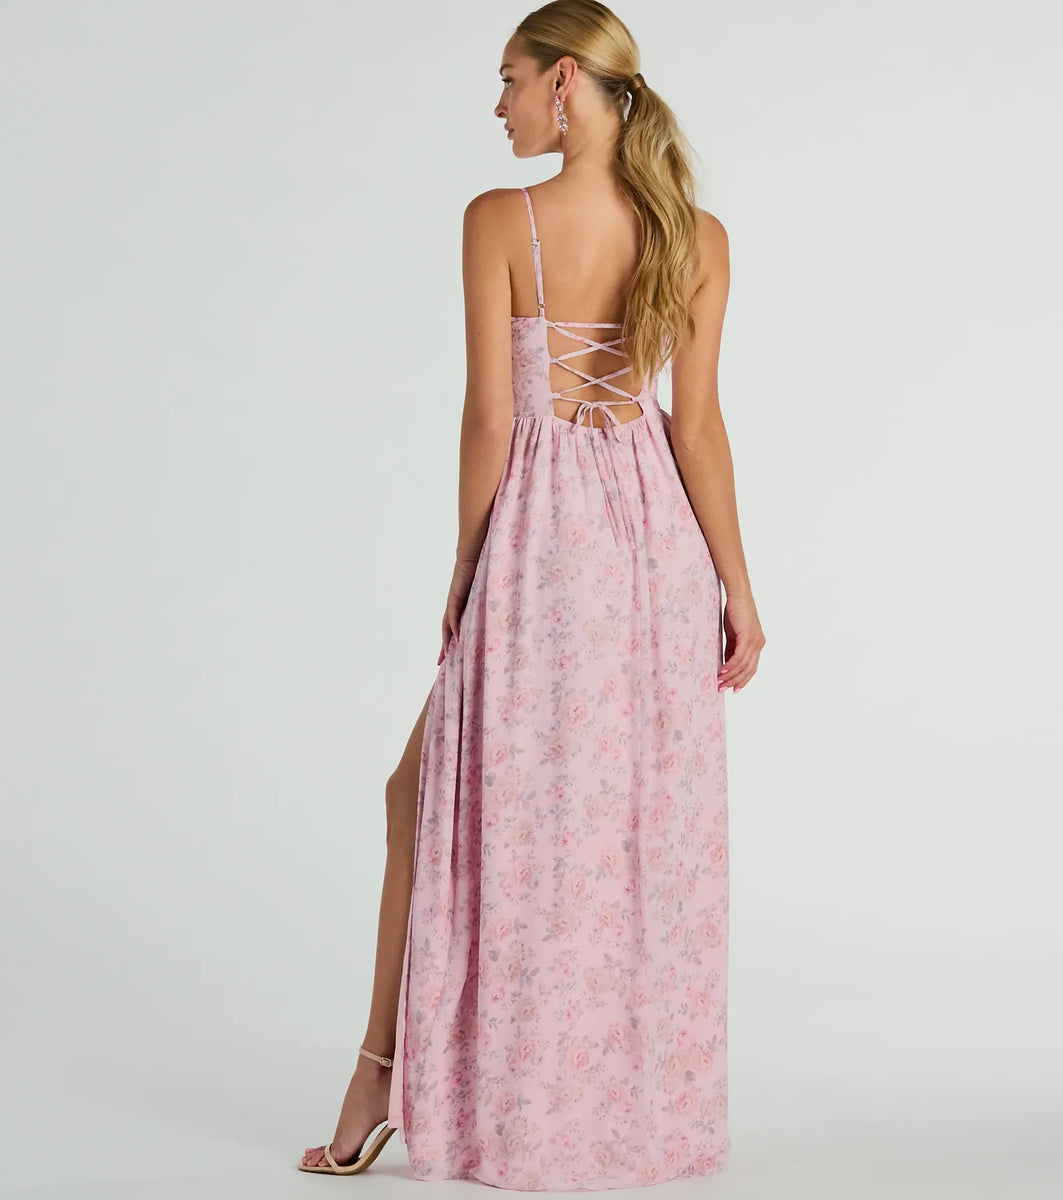 Moment Of Beauty Lace Up Floral Maxi Dress & Windsor